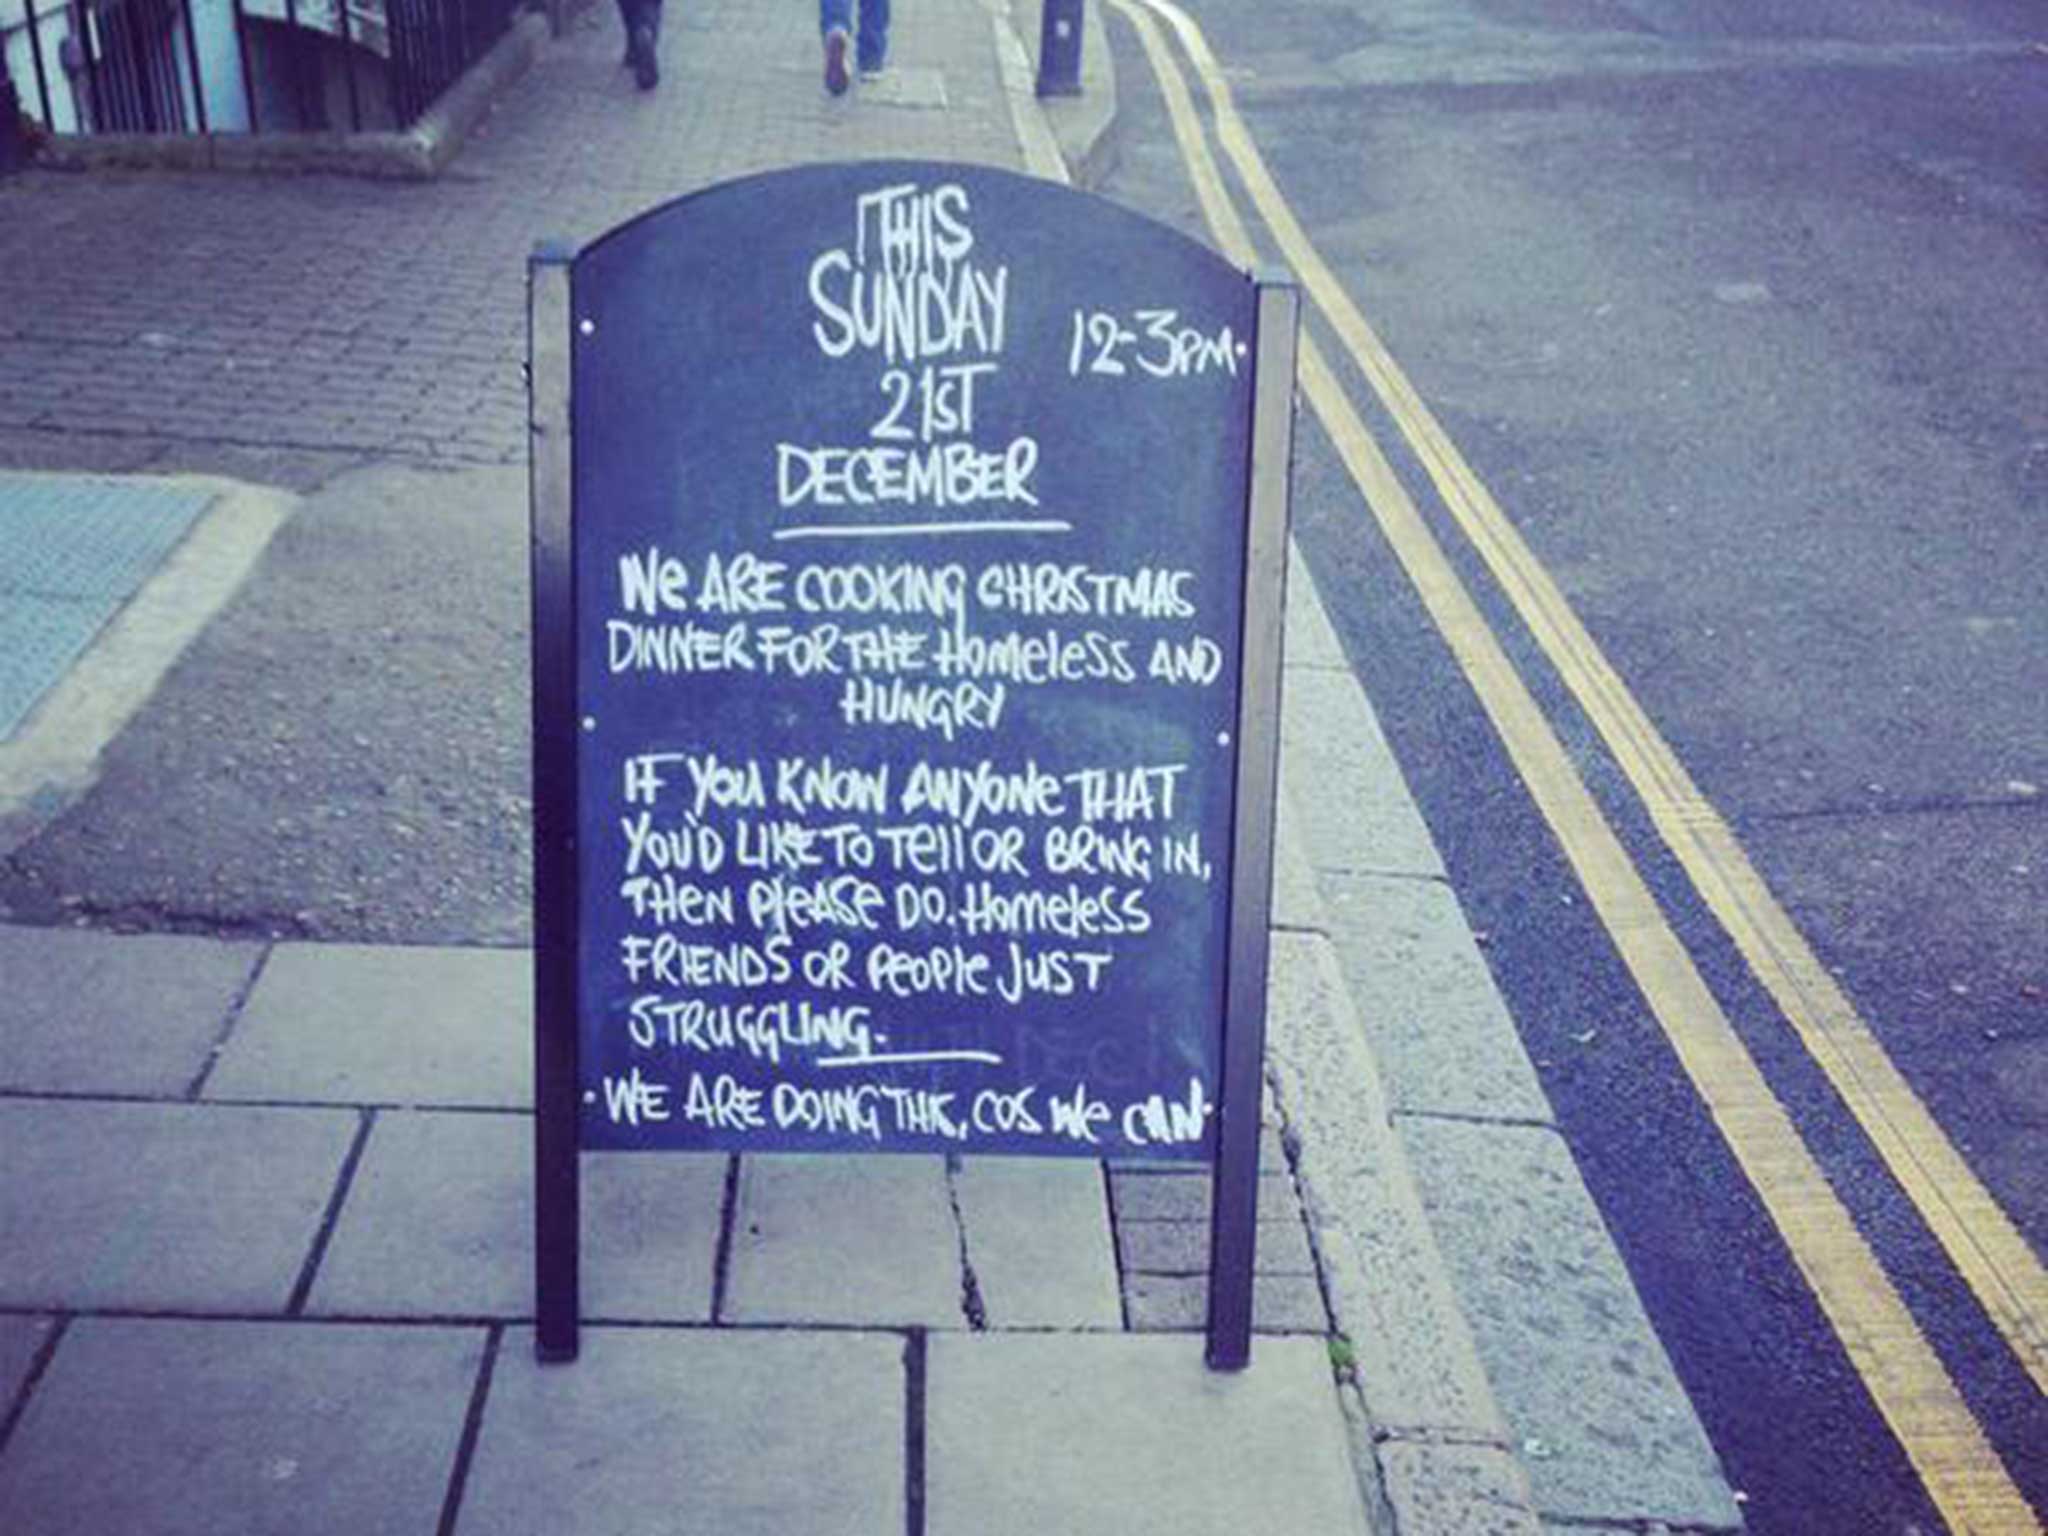 The tweeted image from William IV pub